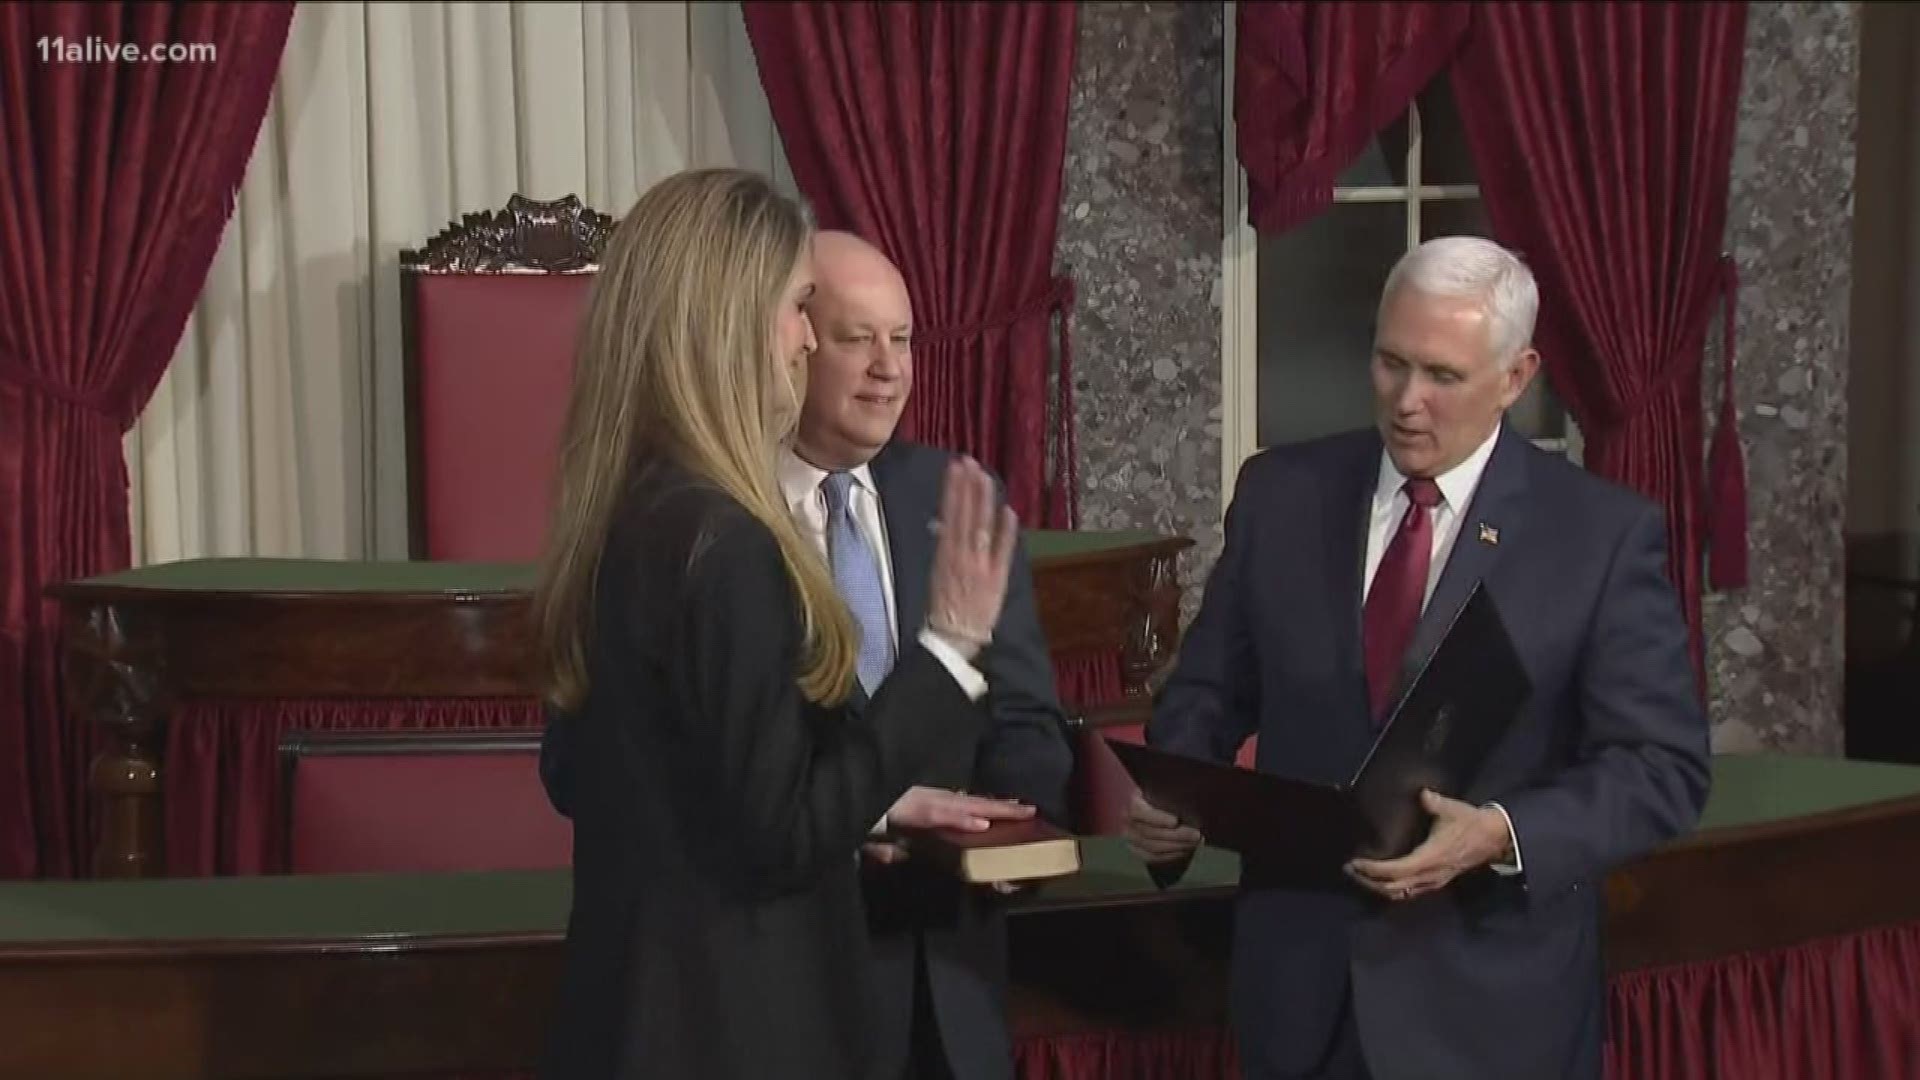 Kelly Loeffler has officially become Georgia's newest U.S. senator Monday, after an official swearing-in ceremony in Washington.